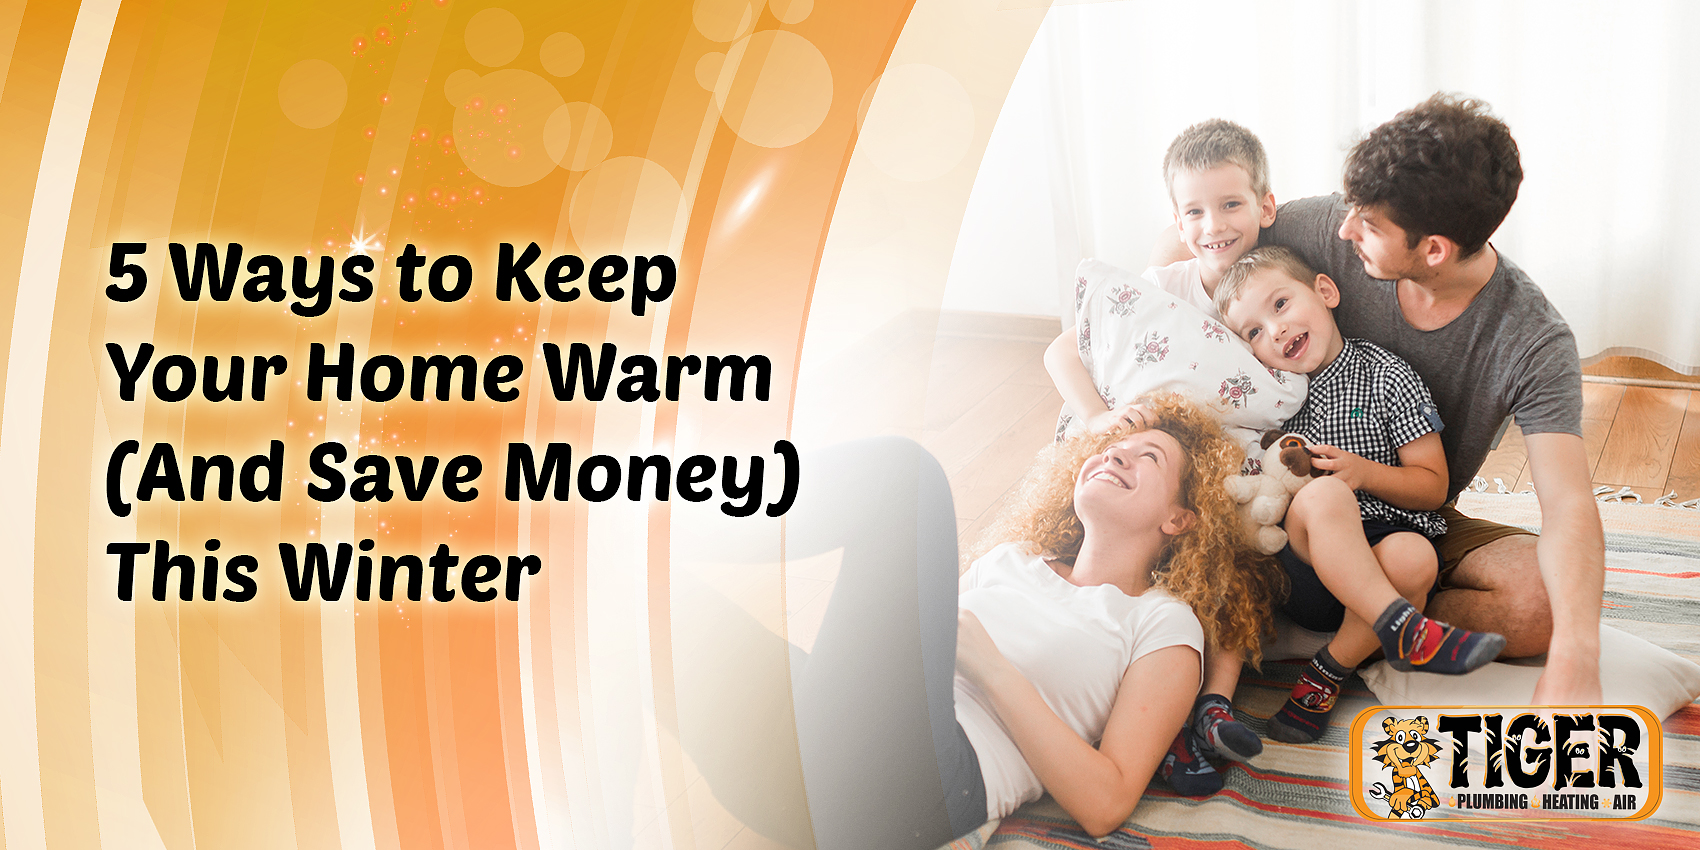 5 Ways to Keep Your Home Warm (And Save Money) This Winter